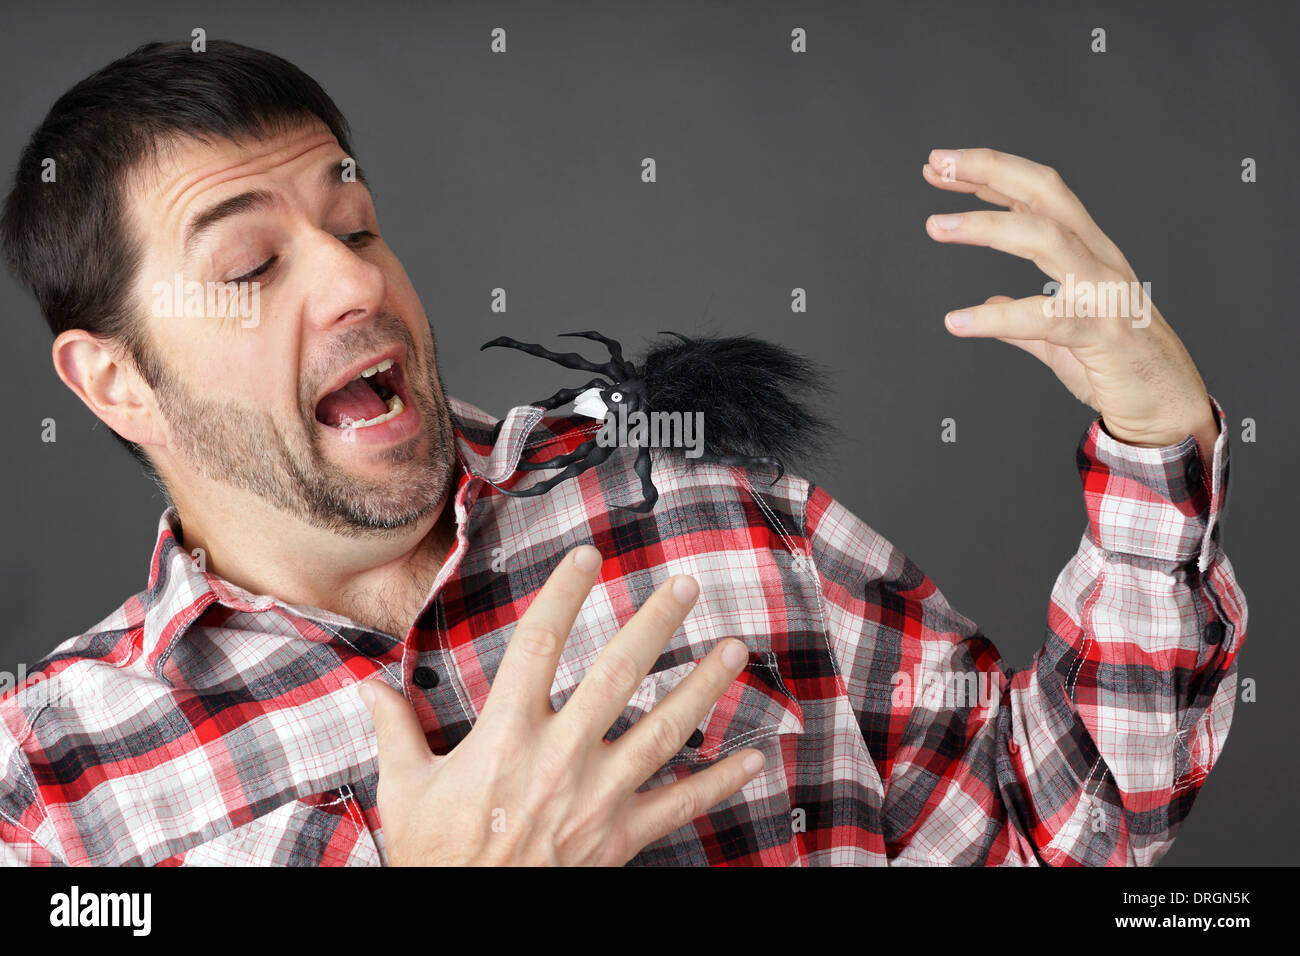 Prank or arachnaphobia concept: man scared by fake plastic spider on shoulder Stock Photo